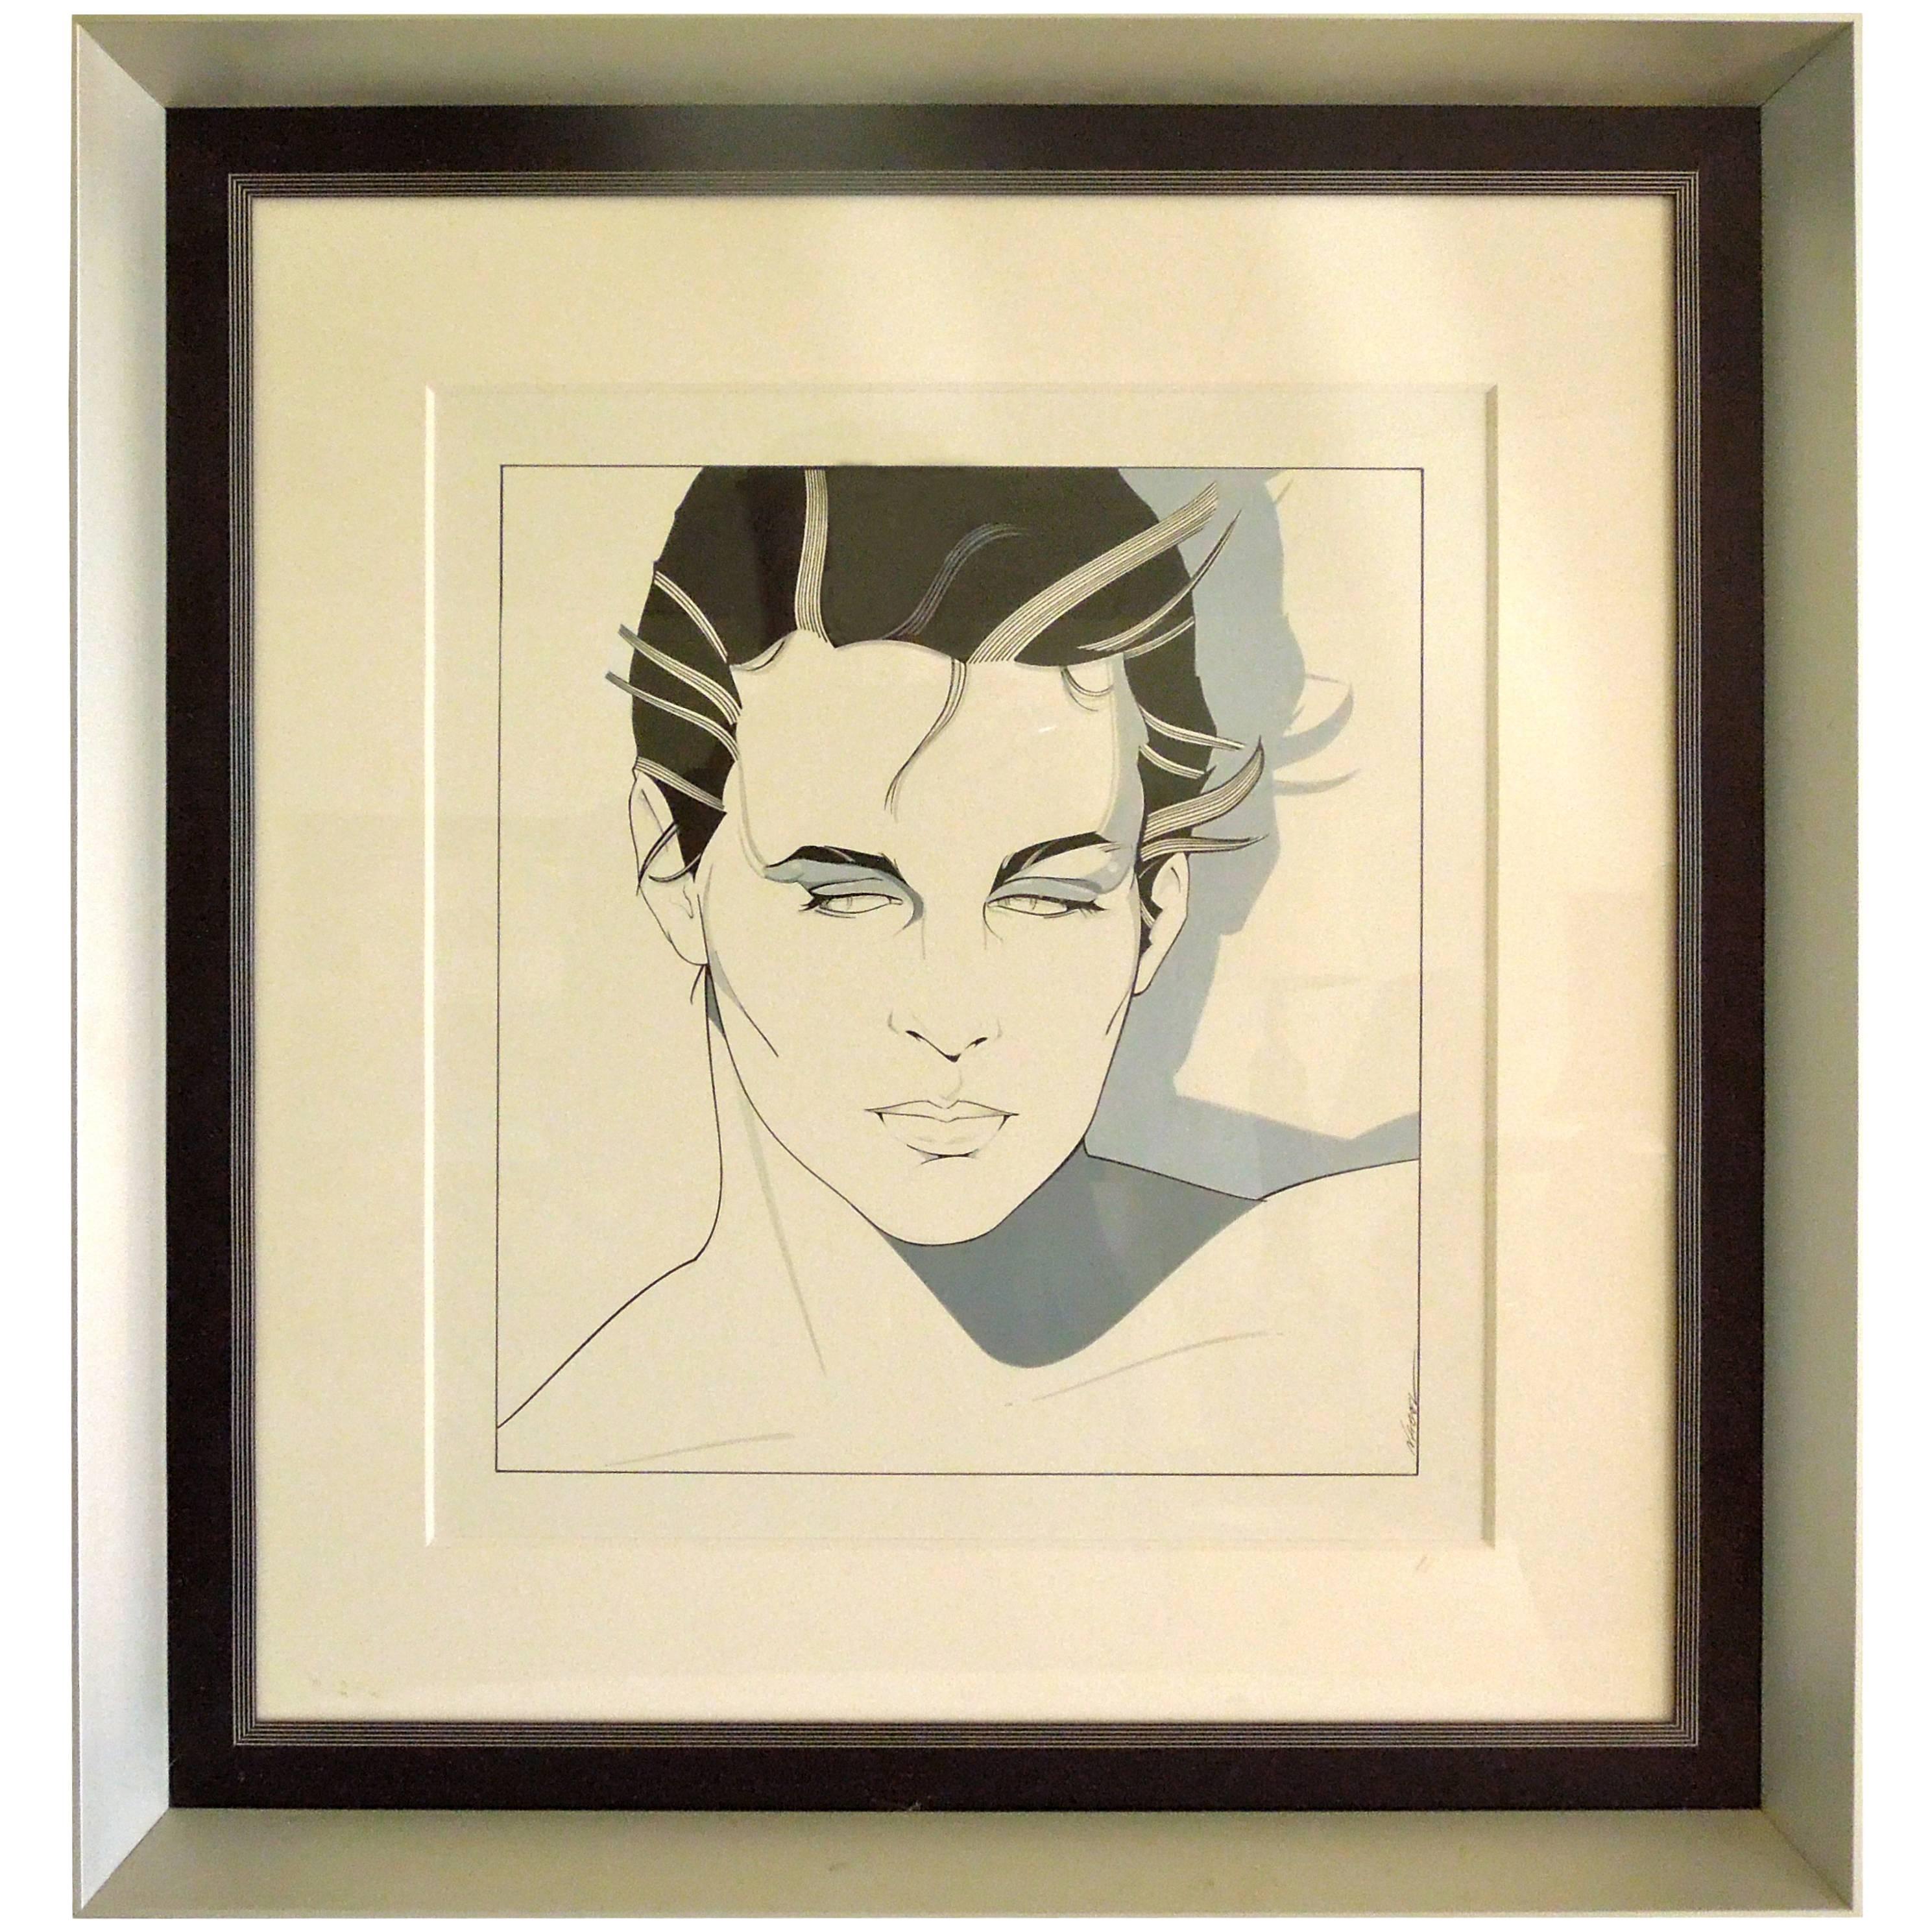 Original Important 1980s Patrick Nagel Iconic Acrylic on Board Painting of a Man